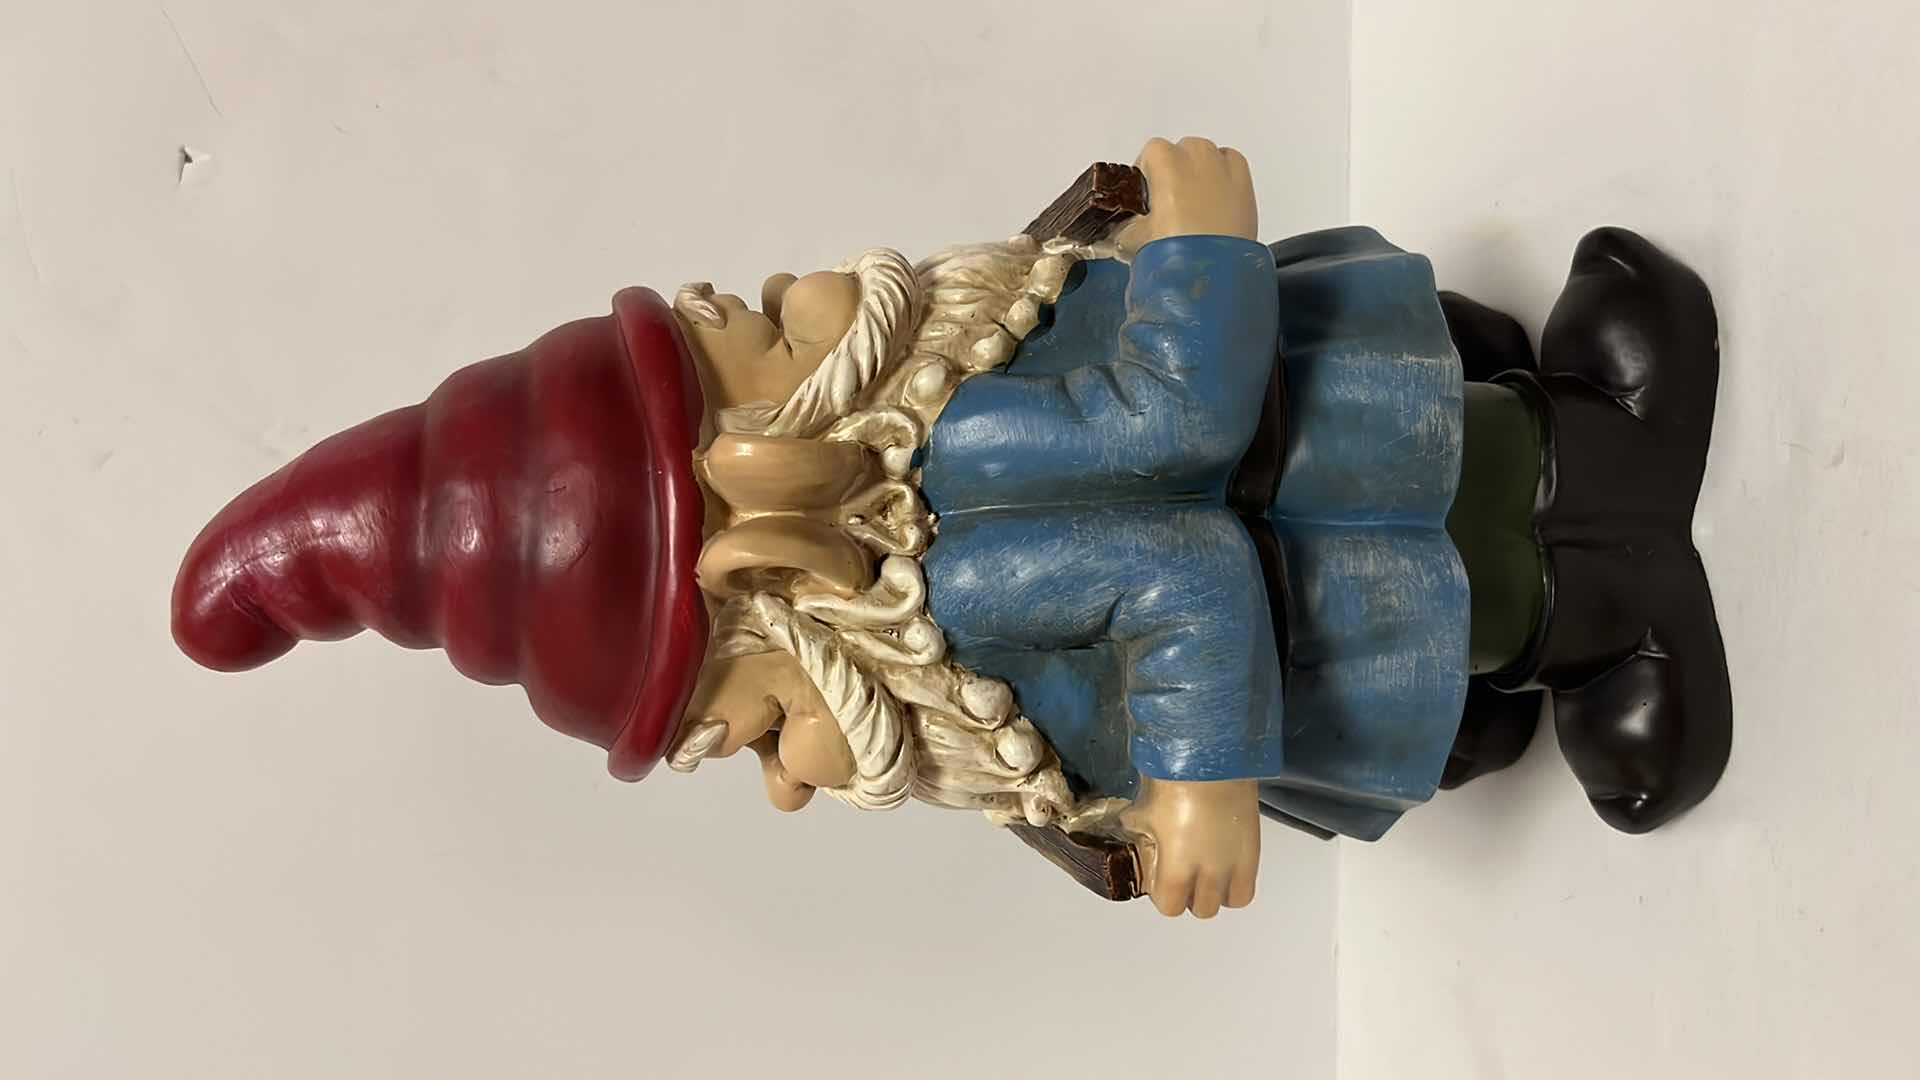 Photo 2 of WELCOME/SCRAM DOUBLE-SIDED RESIN GARDEN GNOME 13.5”